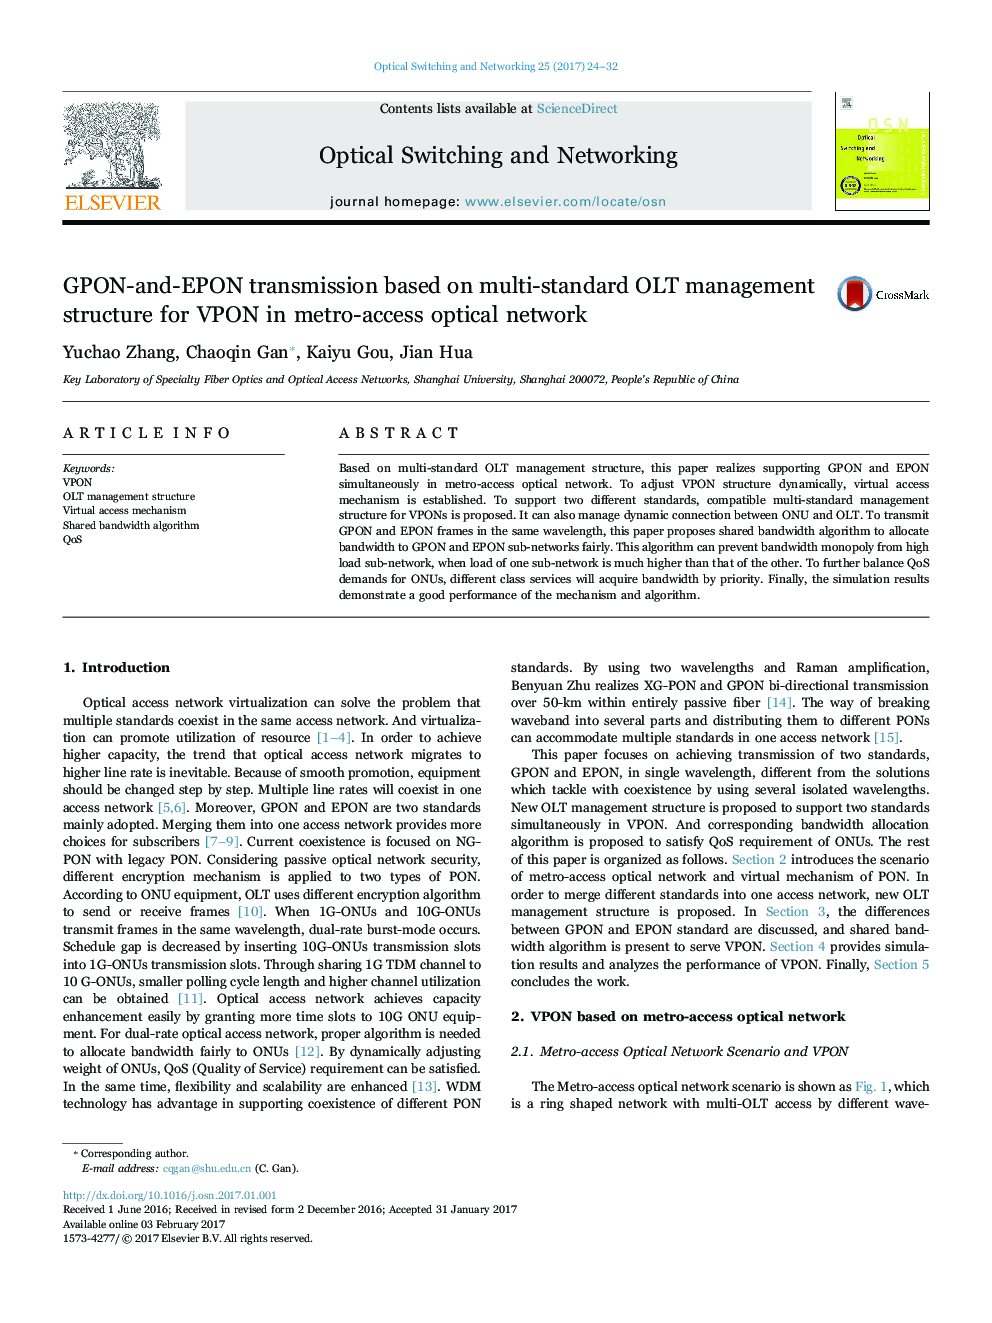 GPON-and-EPON transmission based on multi-standard OLT management structure for VPON in metro-access optical network